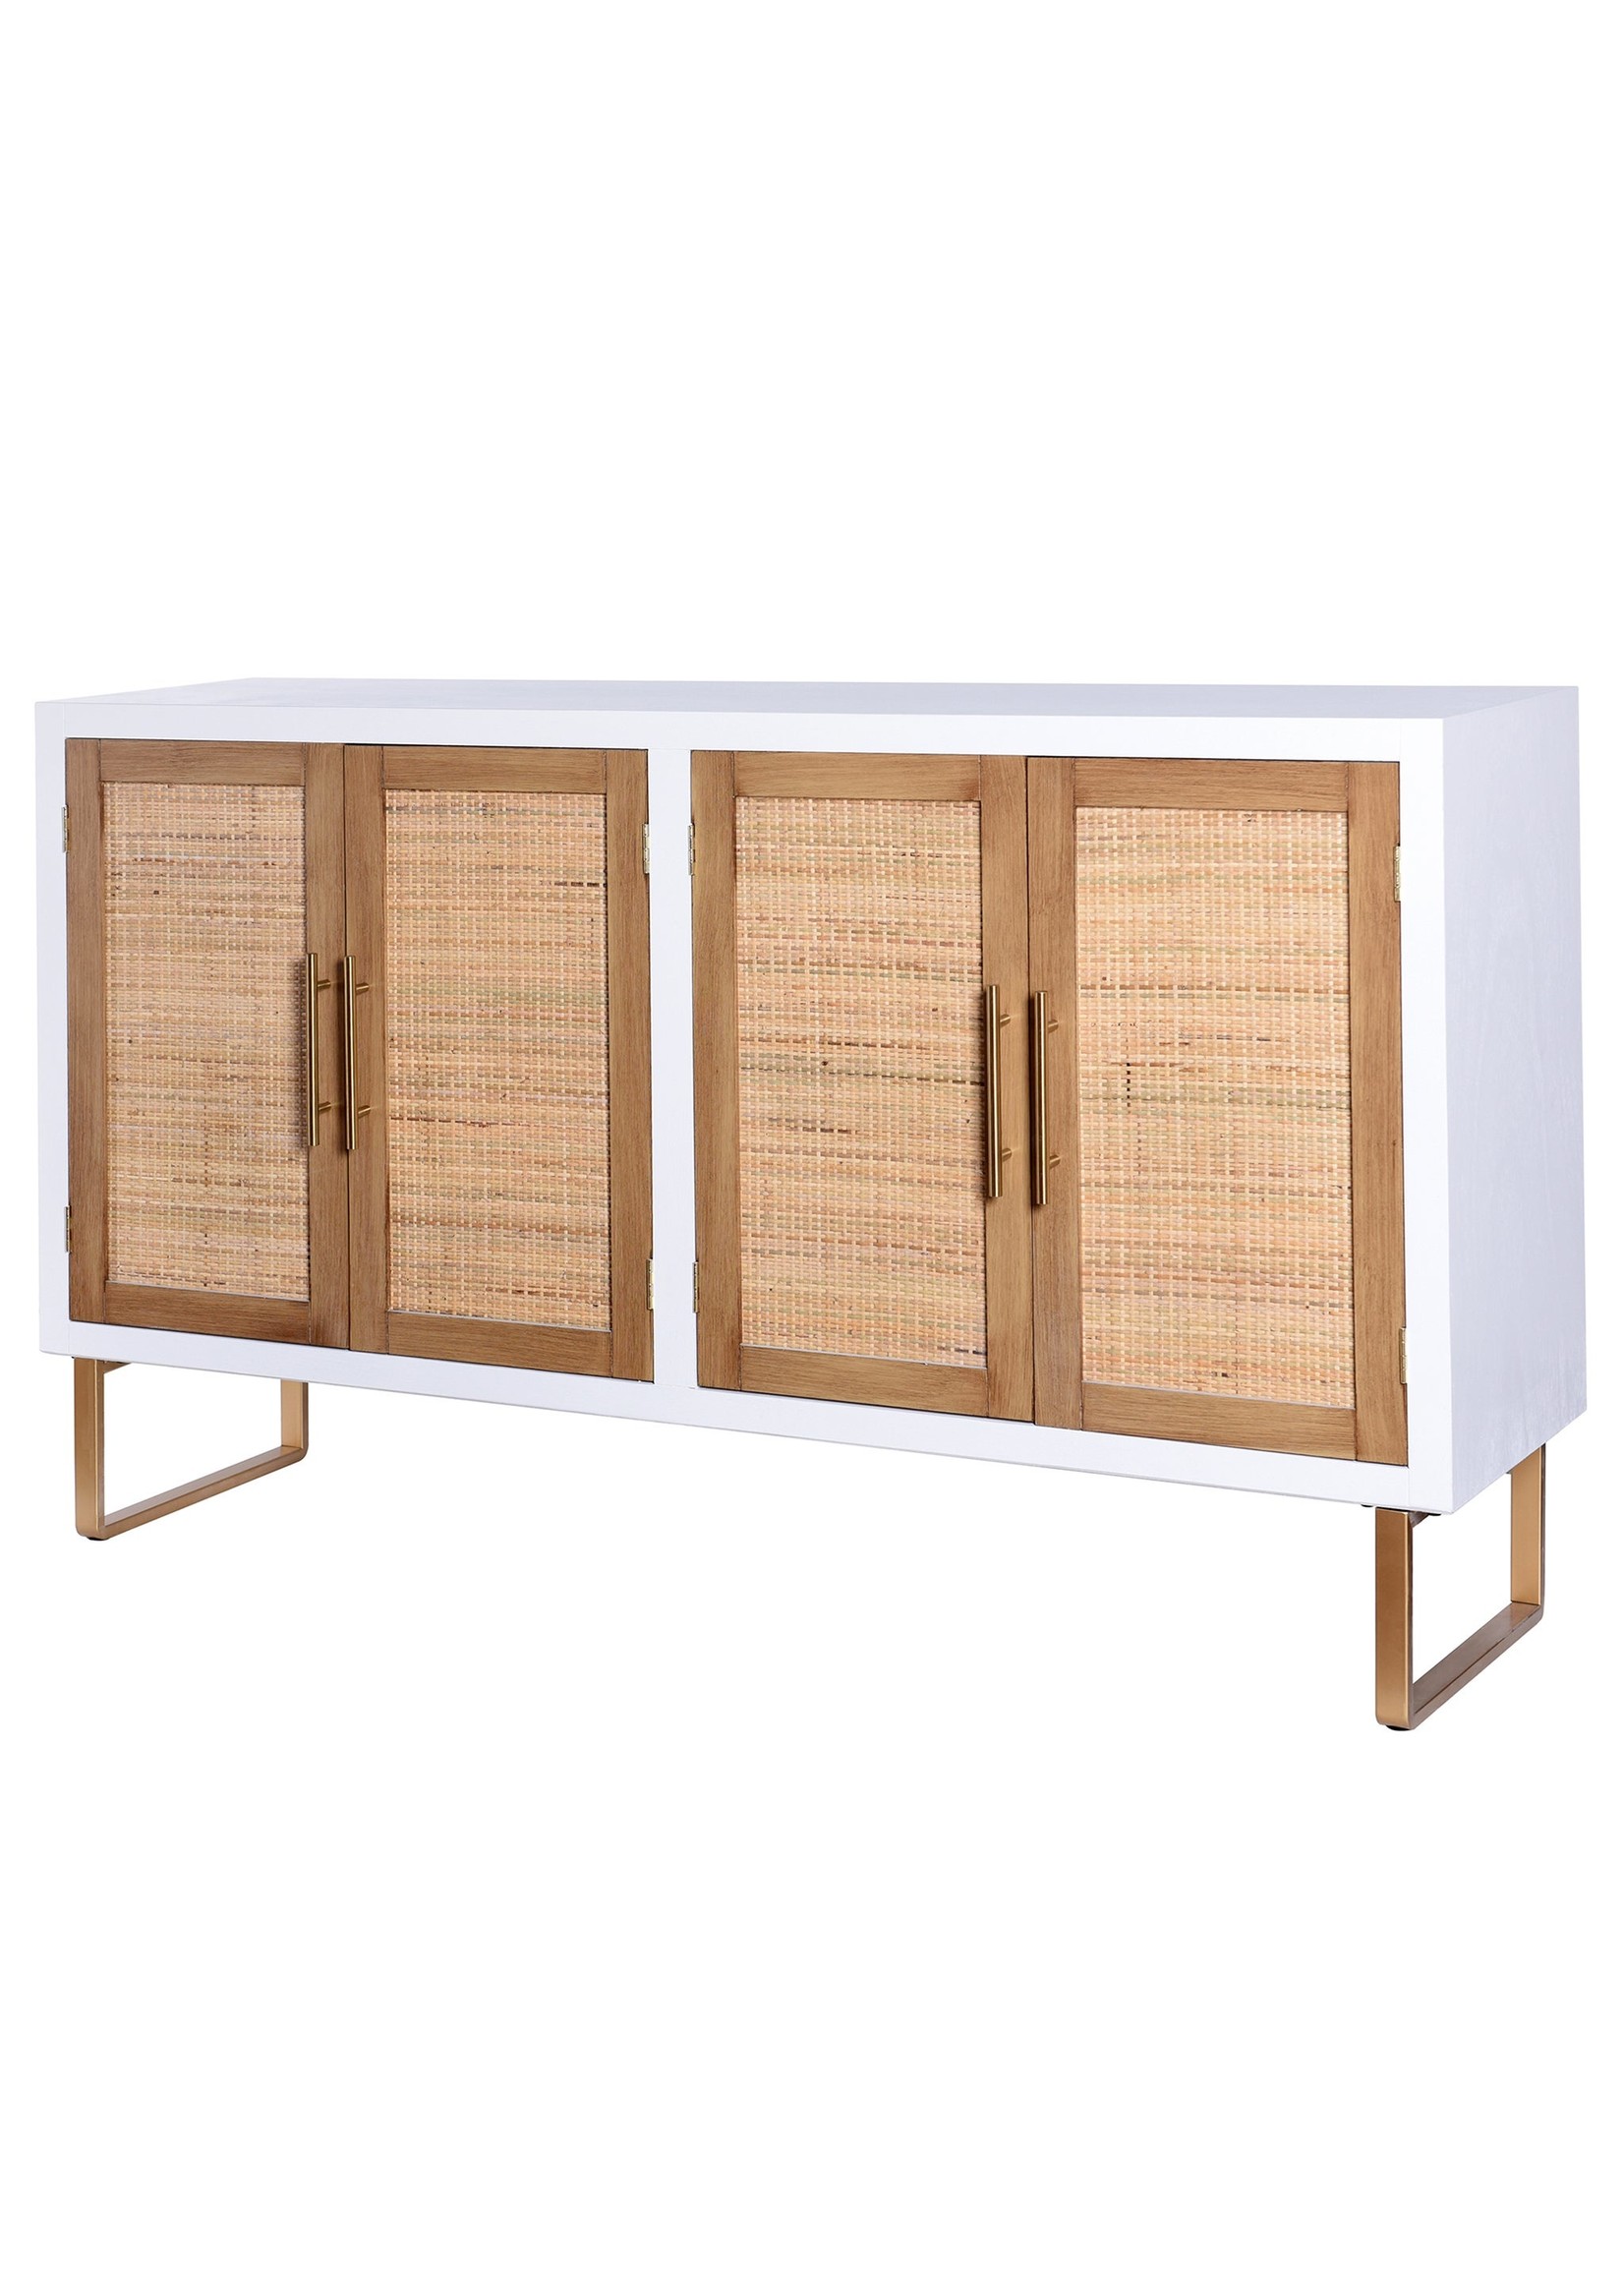 Style Craft TWEED & WHITE Four Door Wooden Cabinet 36in ht. X 60in w. X 16in d.